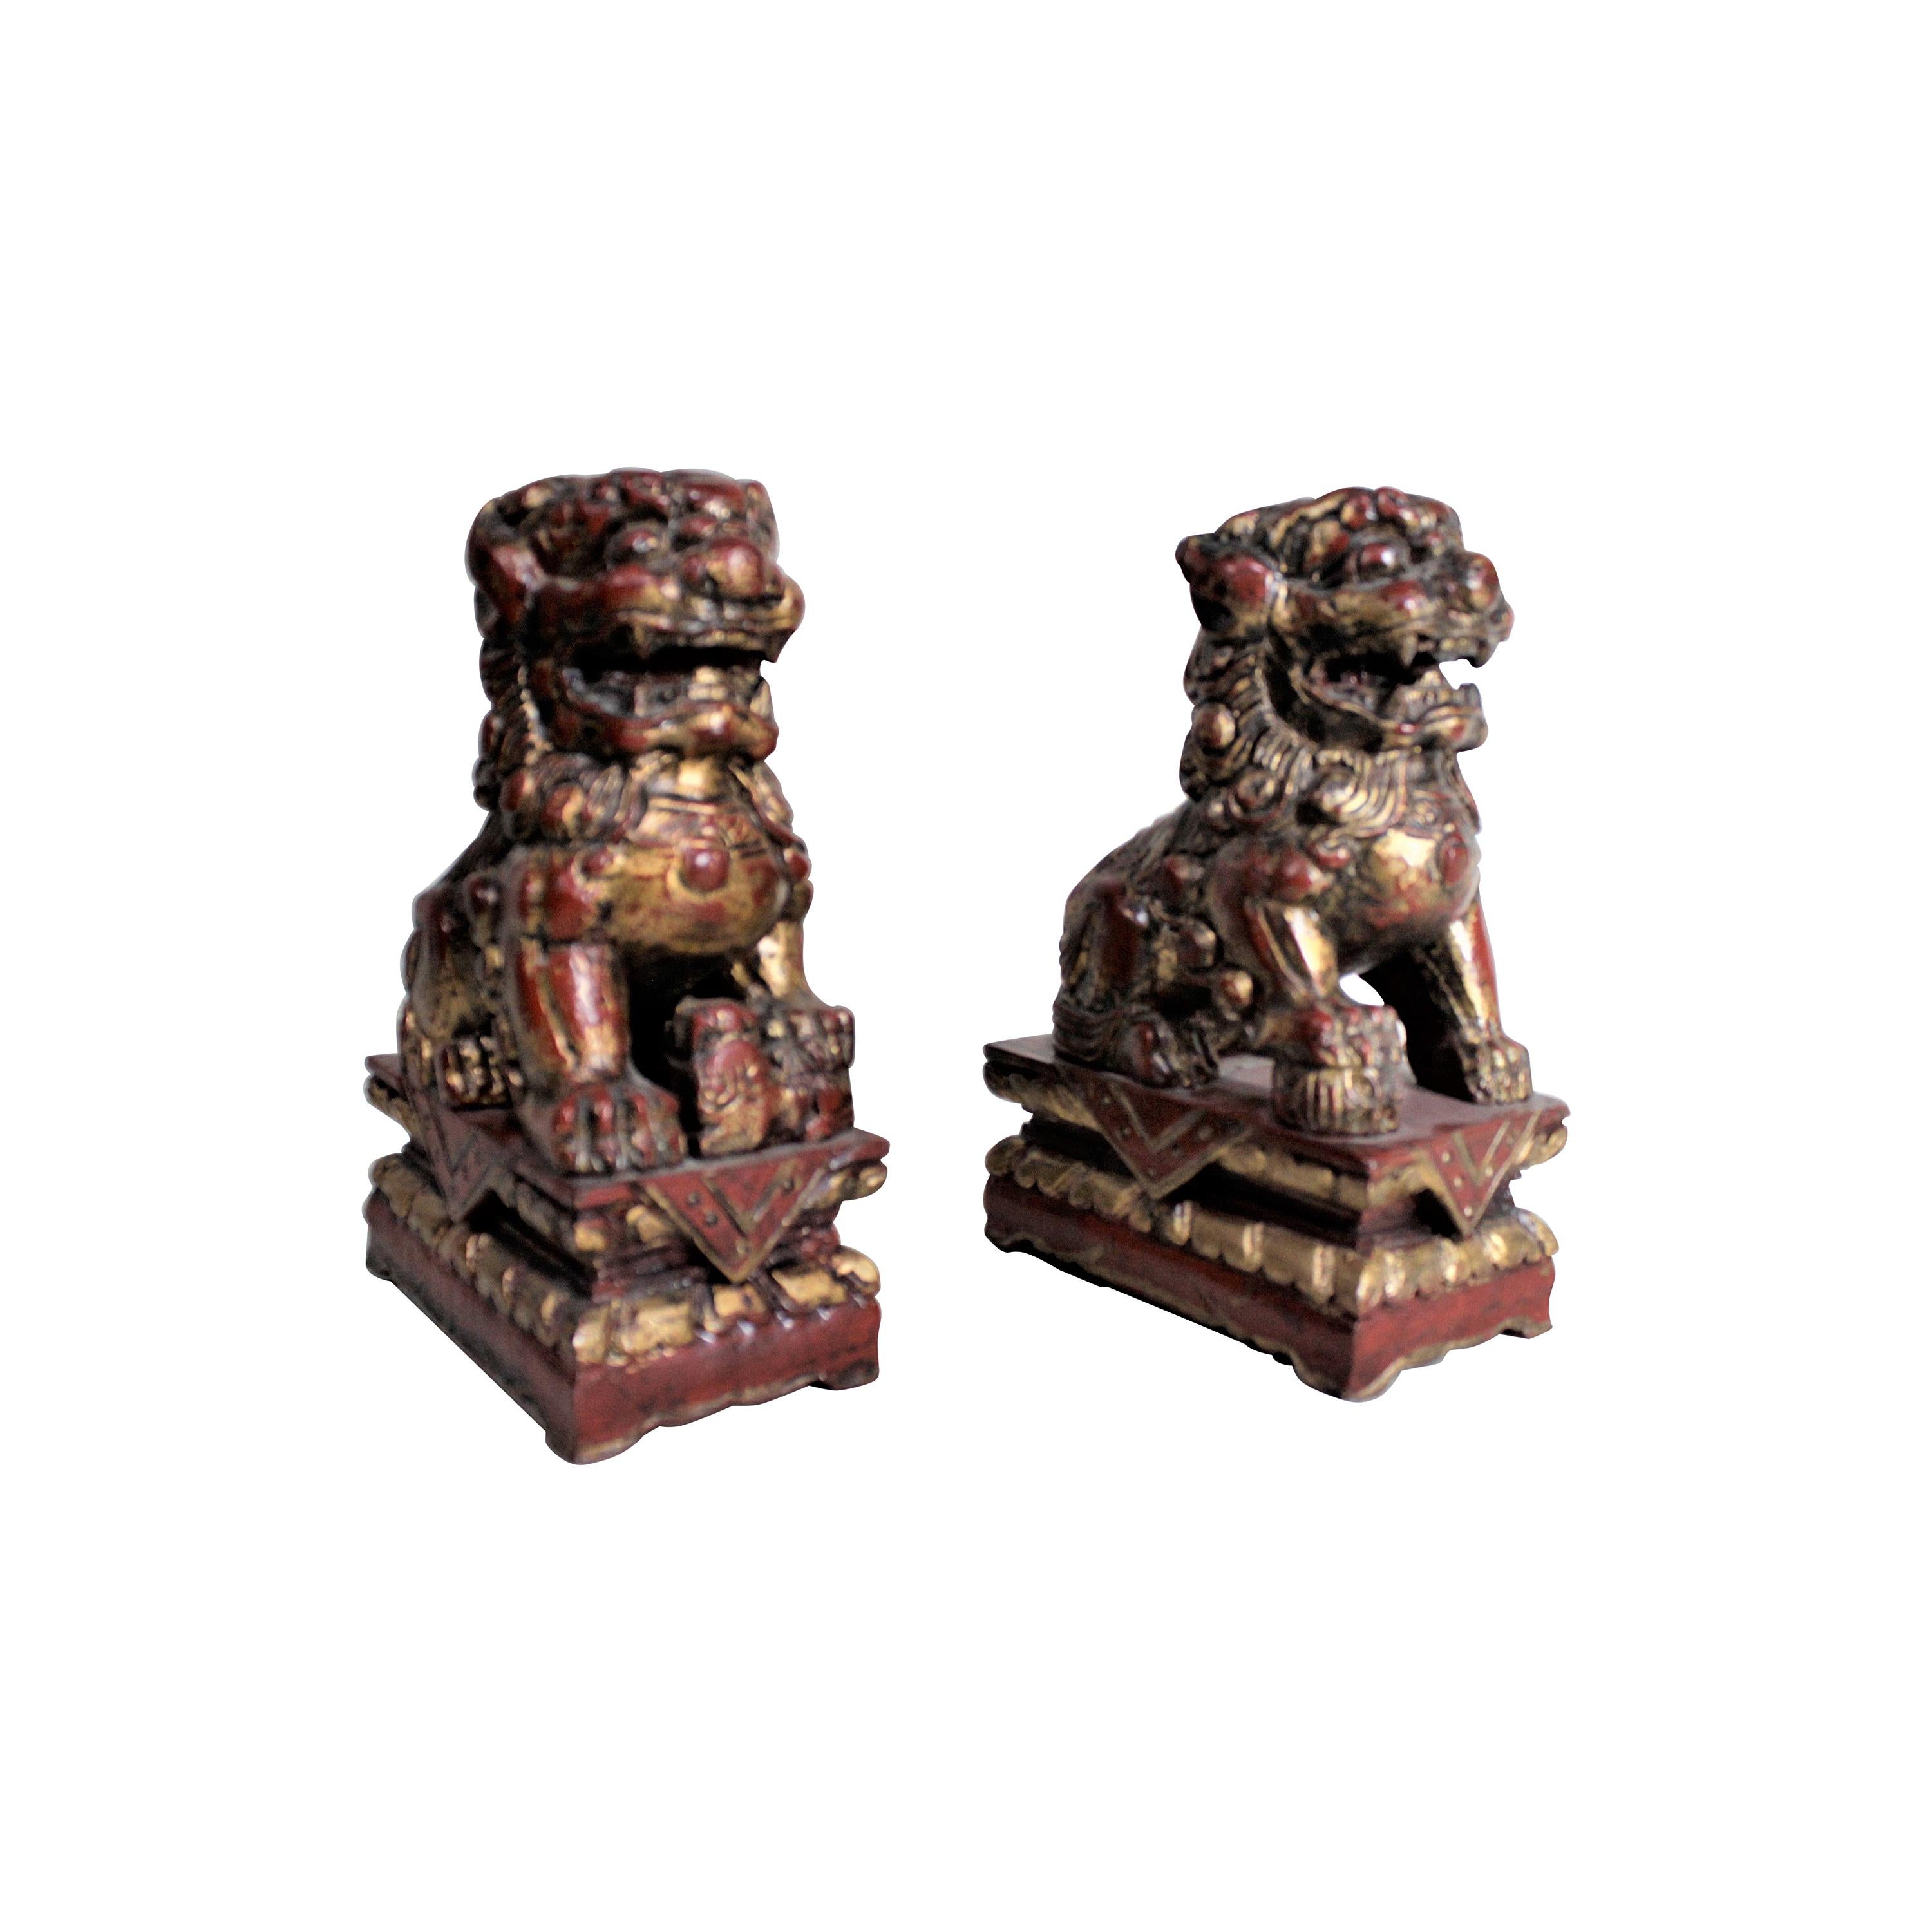 Pair of Carved Wood and Gilt Finished Chinese Foo Dog Figurines or Sculptures For Sale